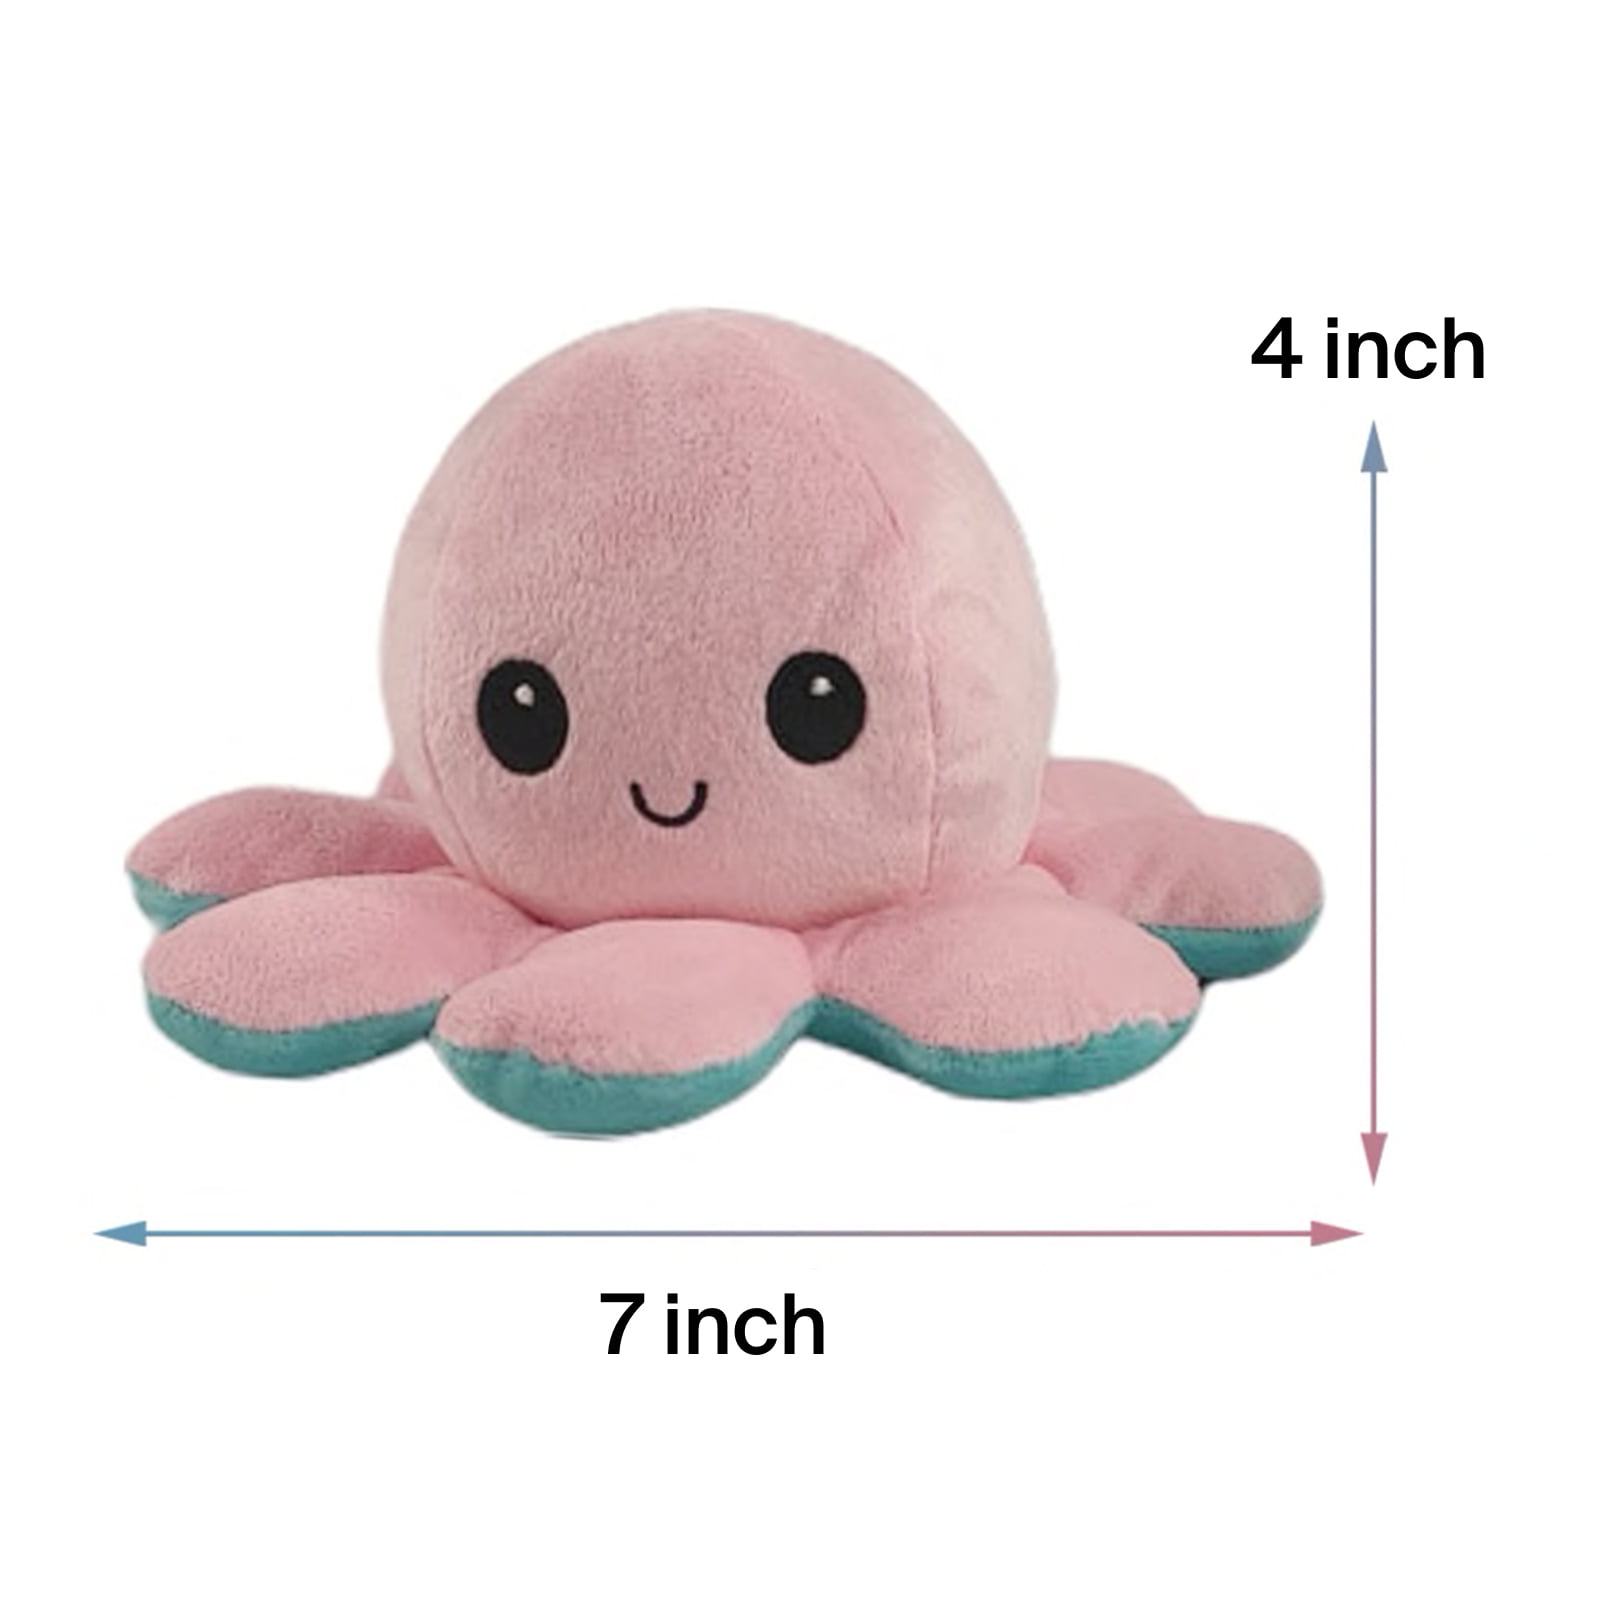 DINGPC Reversible Flip Octopus Toy Soft Simulation Double-Sided Reversible Happy Sad Angry Octopus Stuffed Plush Doll Toys Kids Gift 10x20cm 11